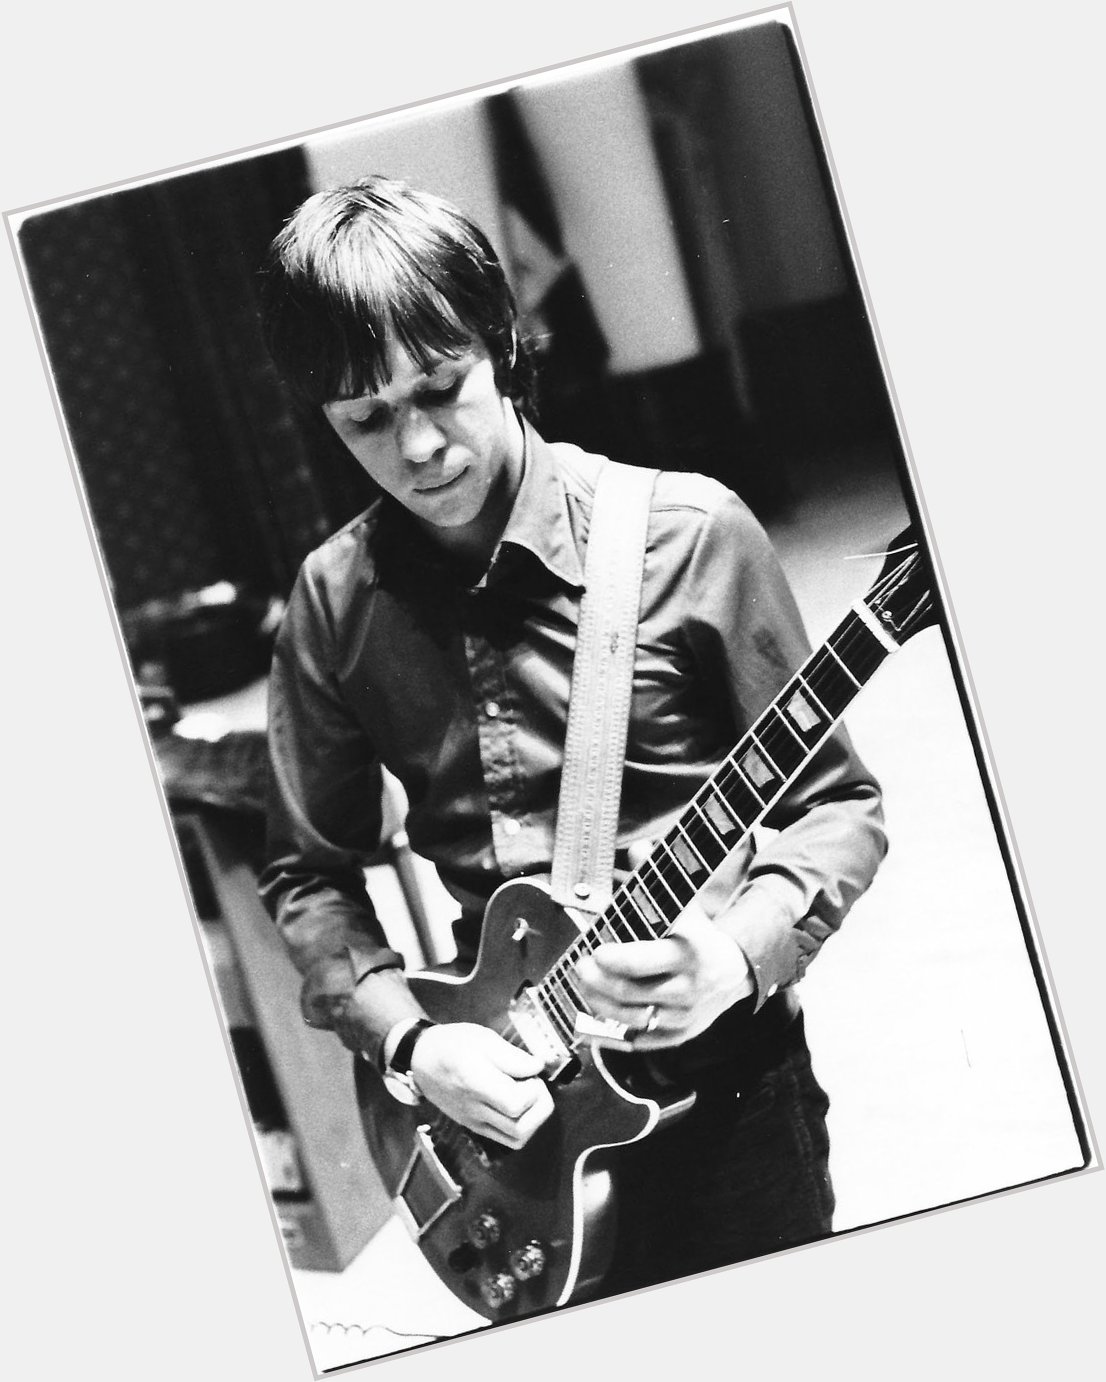 A massive Happy Birthday to guitar supremo Robin Trower, born on this day in Catford, London in 1945.     